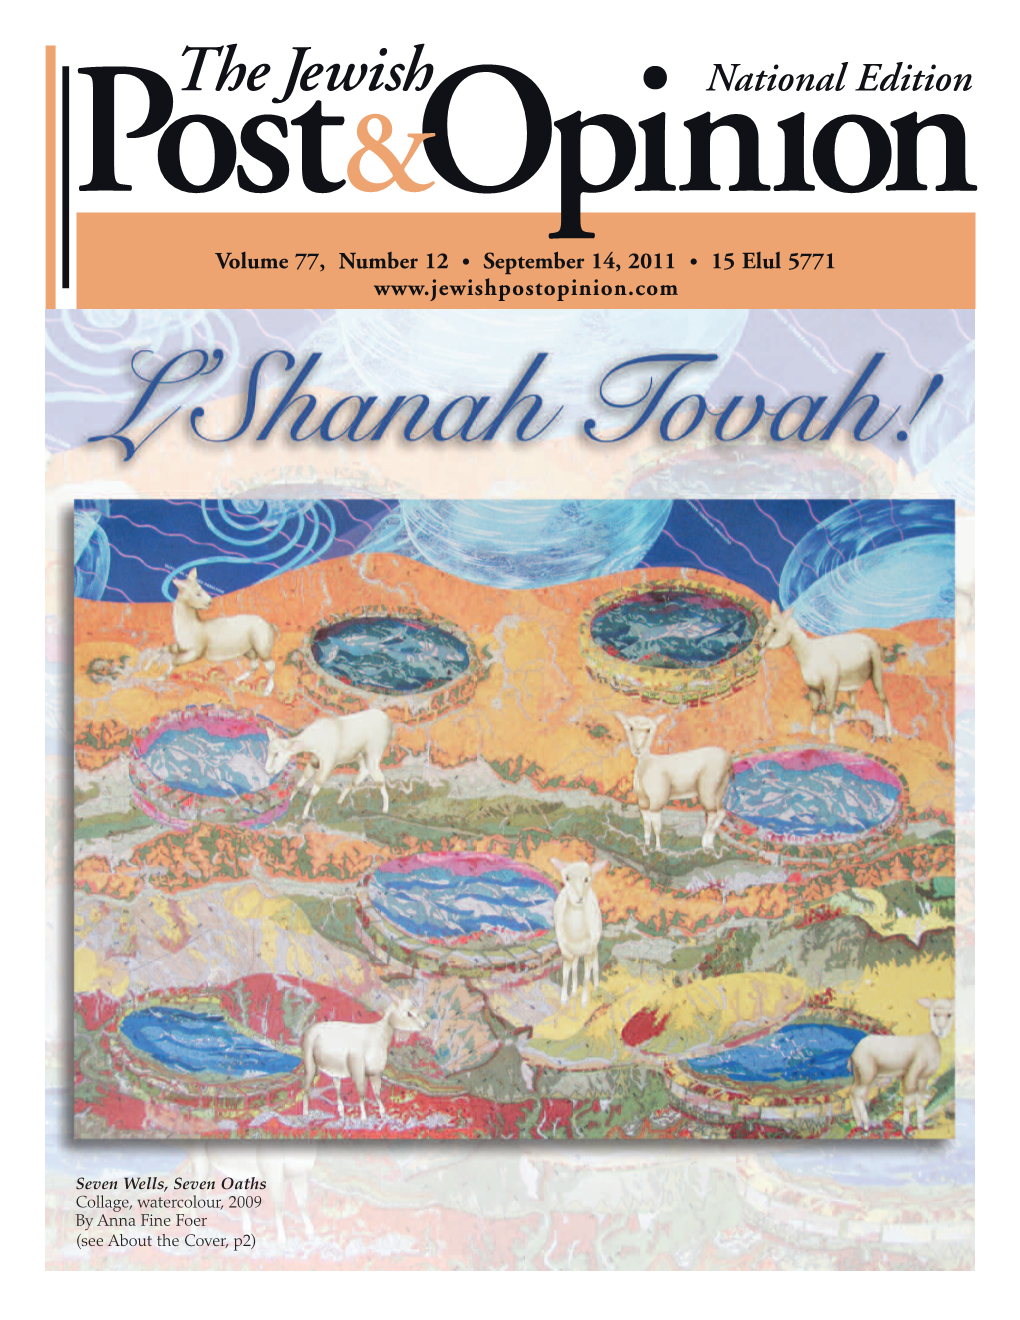 The Jewish National Edition Post &Opinion Volume 77, Number 12 • September 14, 2011 • 15 Elul 5771